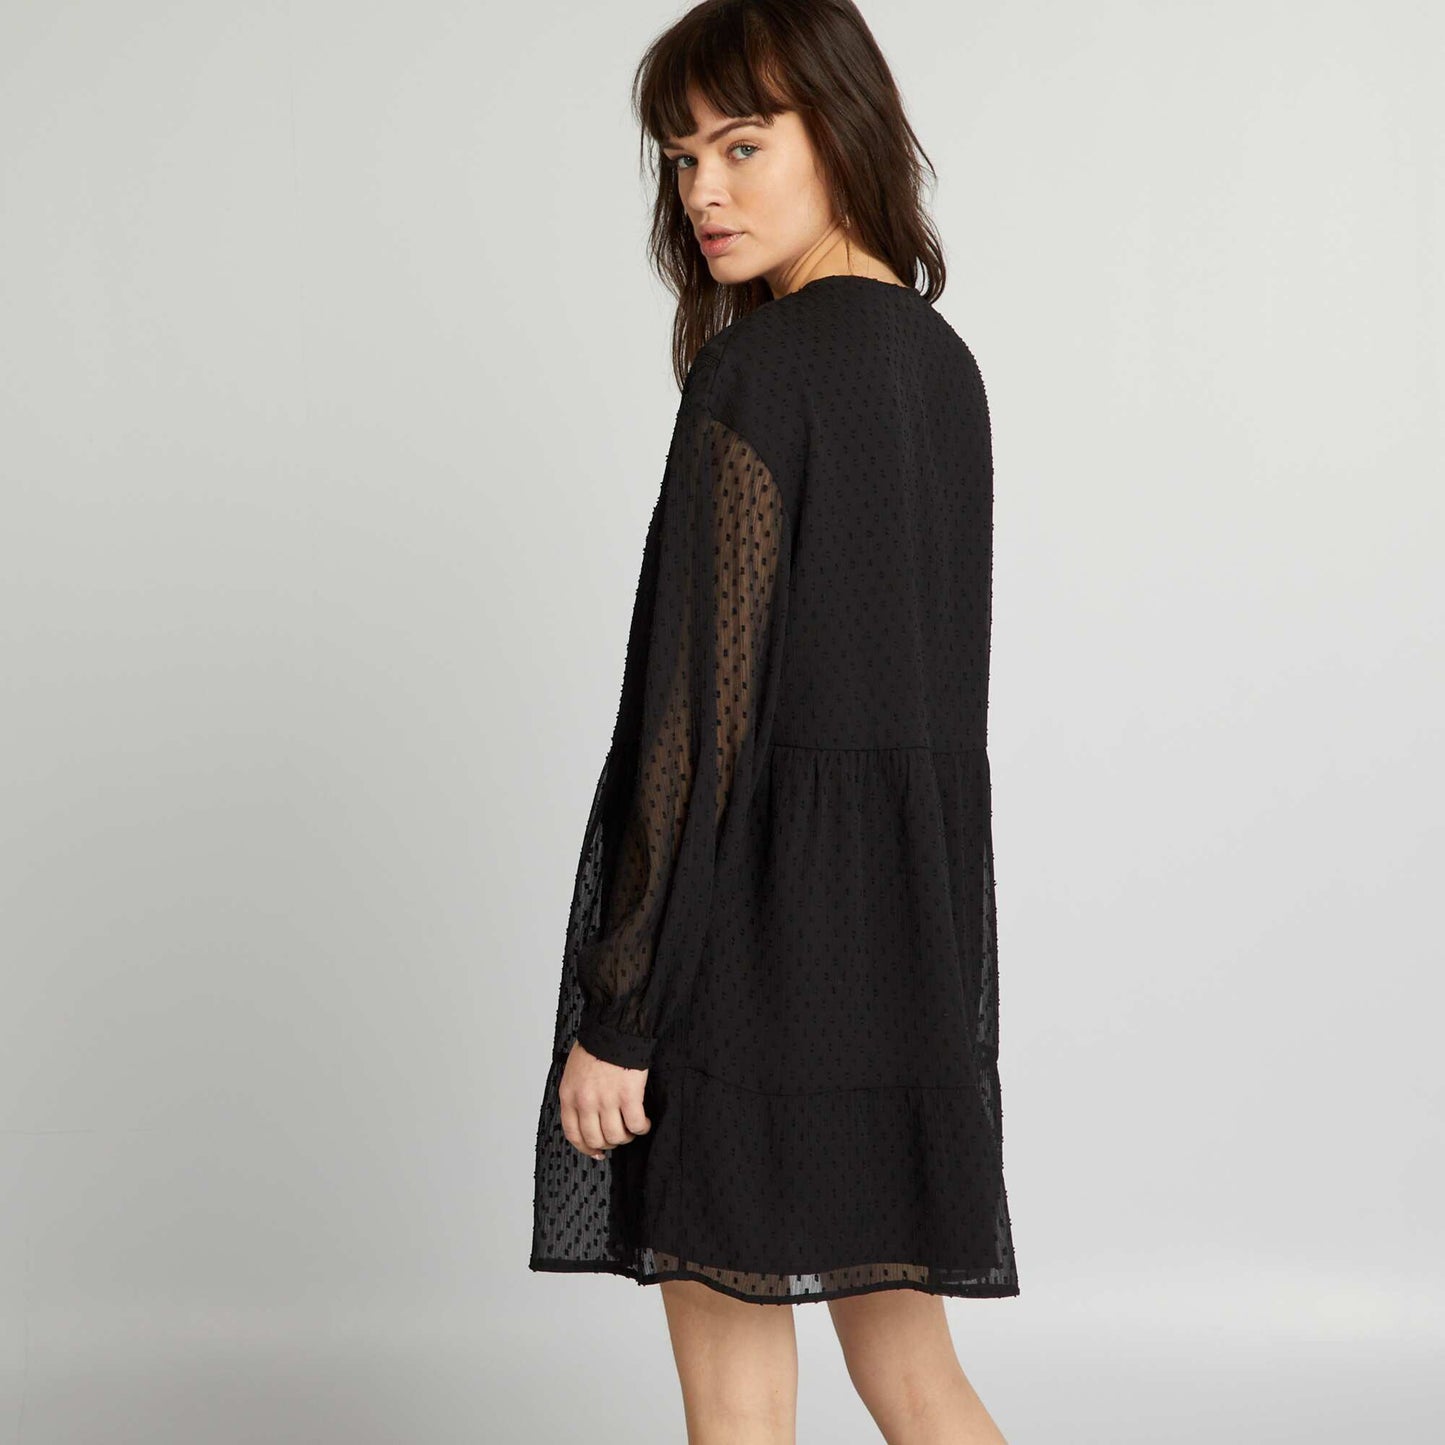 Dotted voile dress black